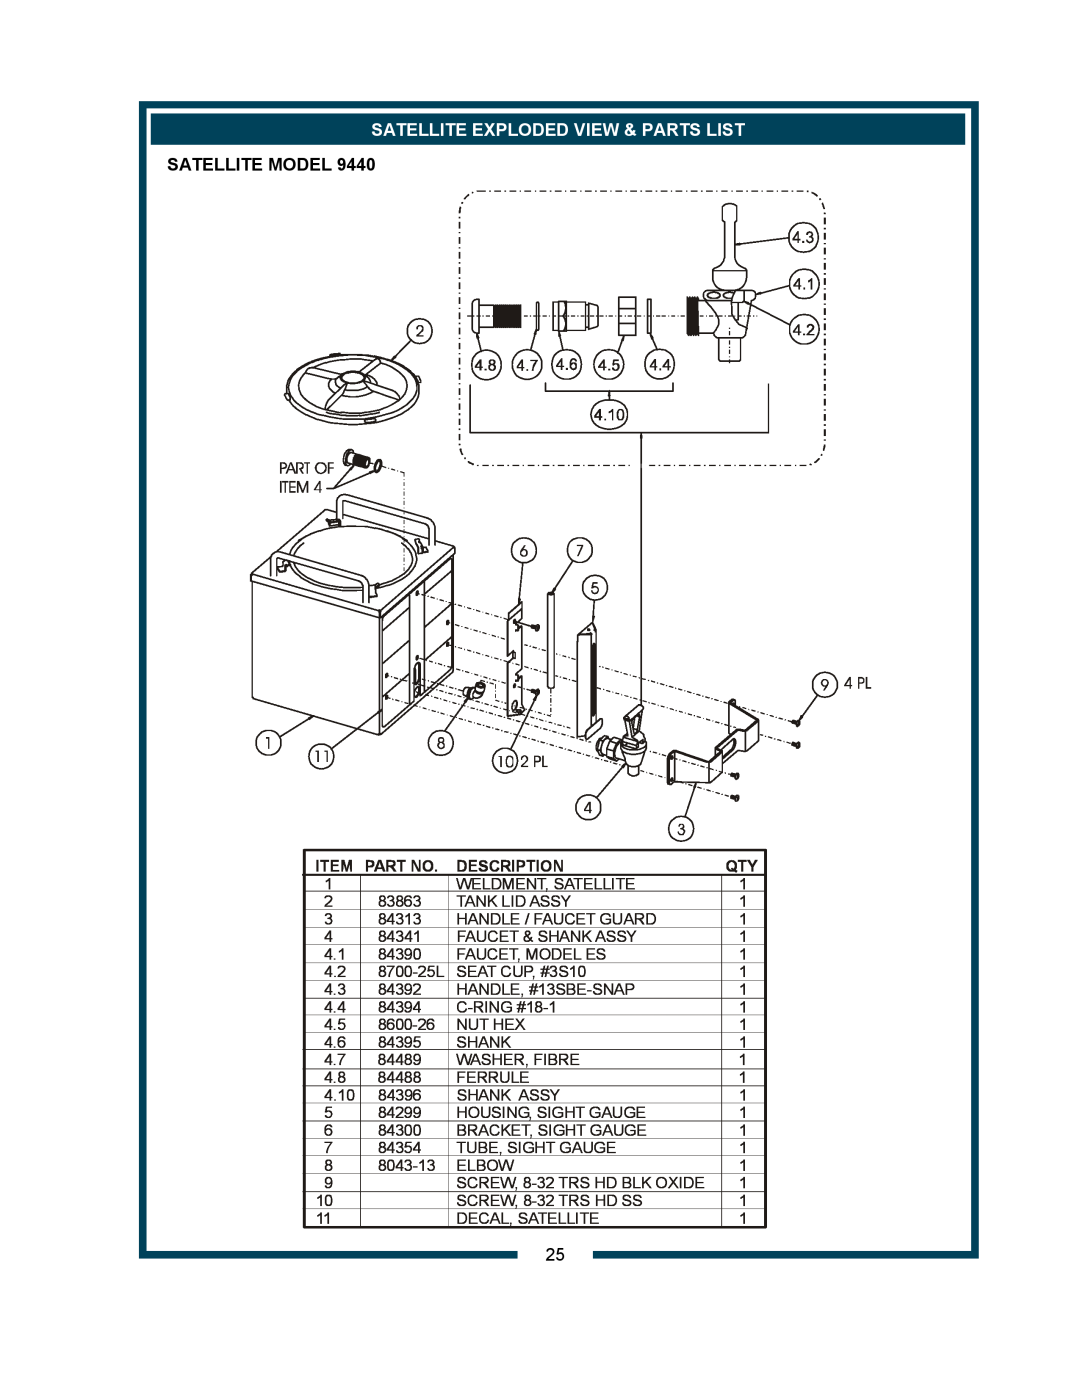 Bloomfield 9421 (SS2-HE) owner manual Satellite Exploded View & Parts List, Satellite Model, Description 